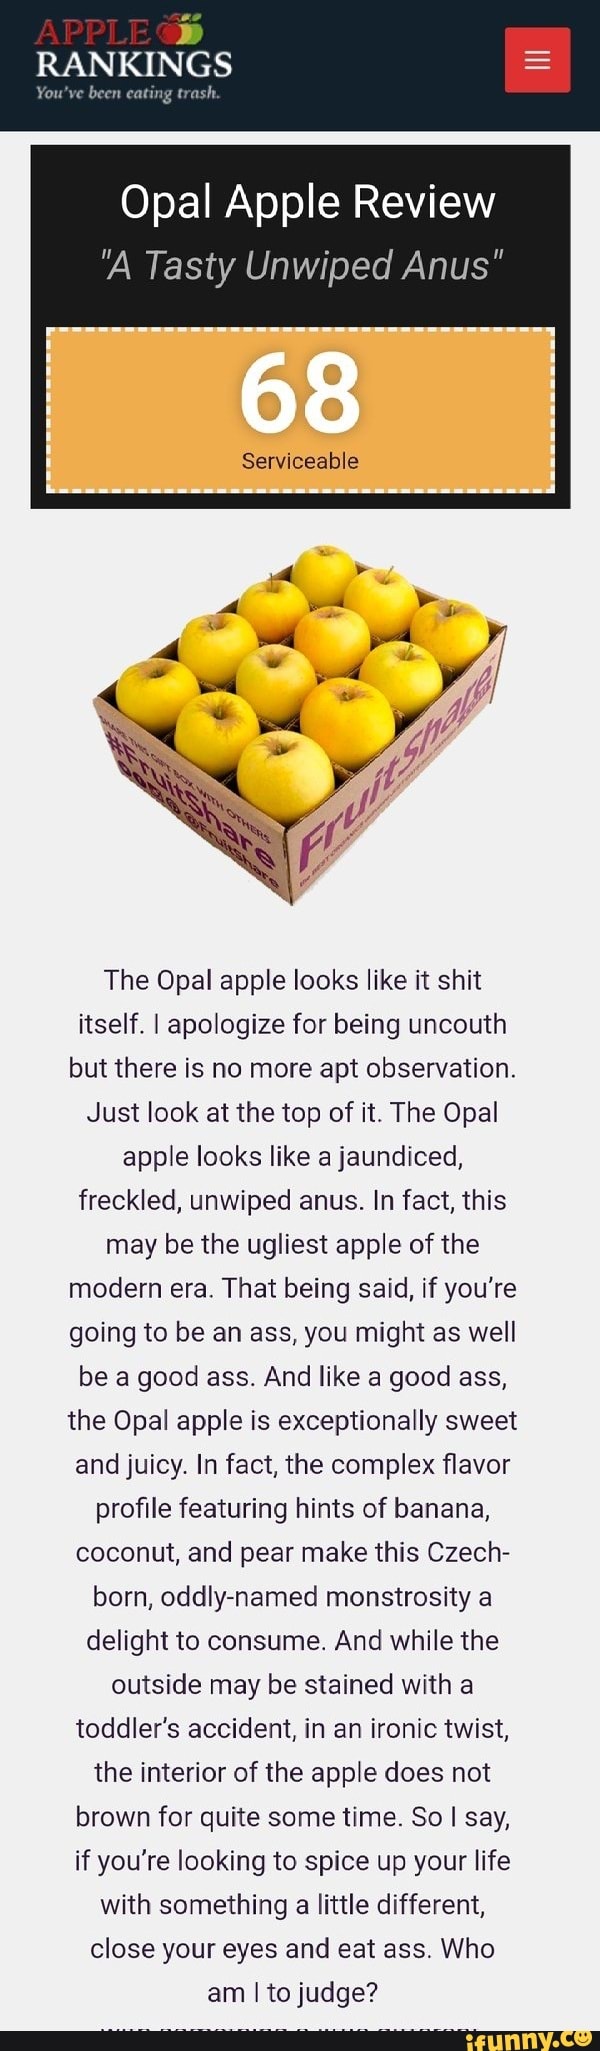 Do Opal Apples Really Never Brown?